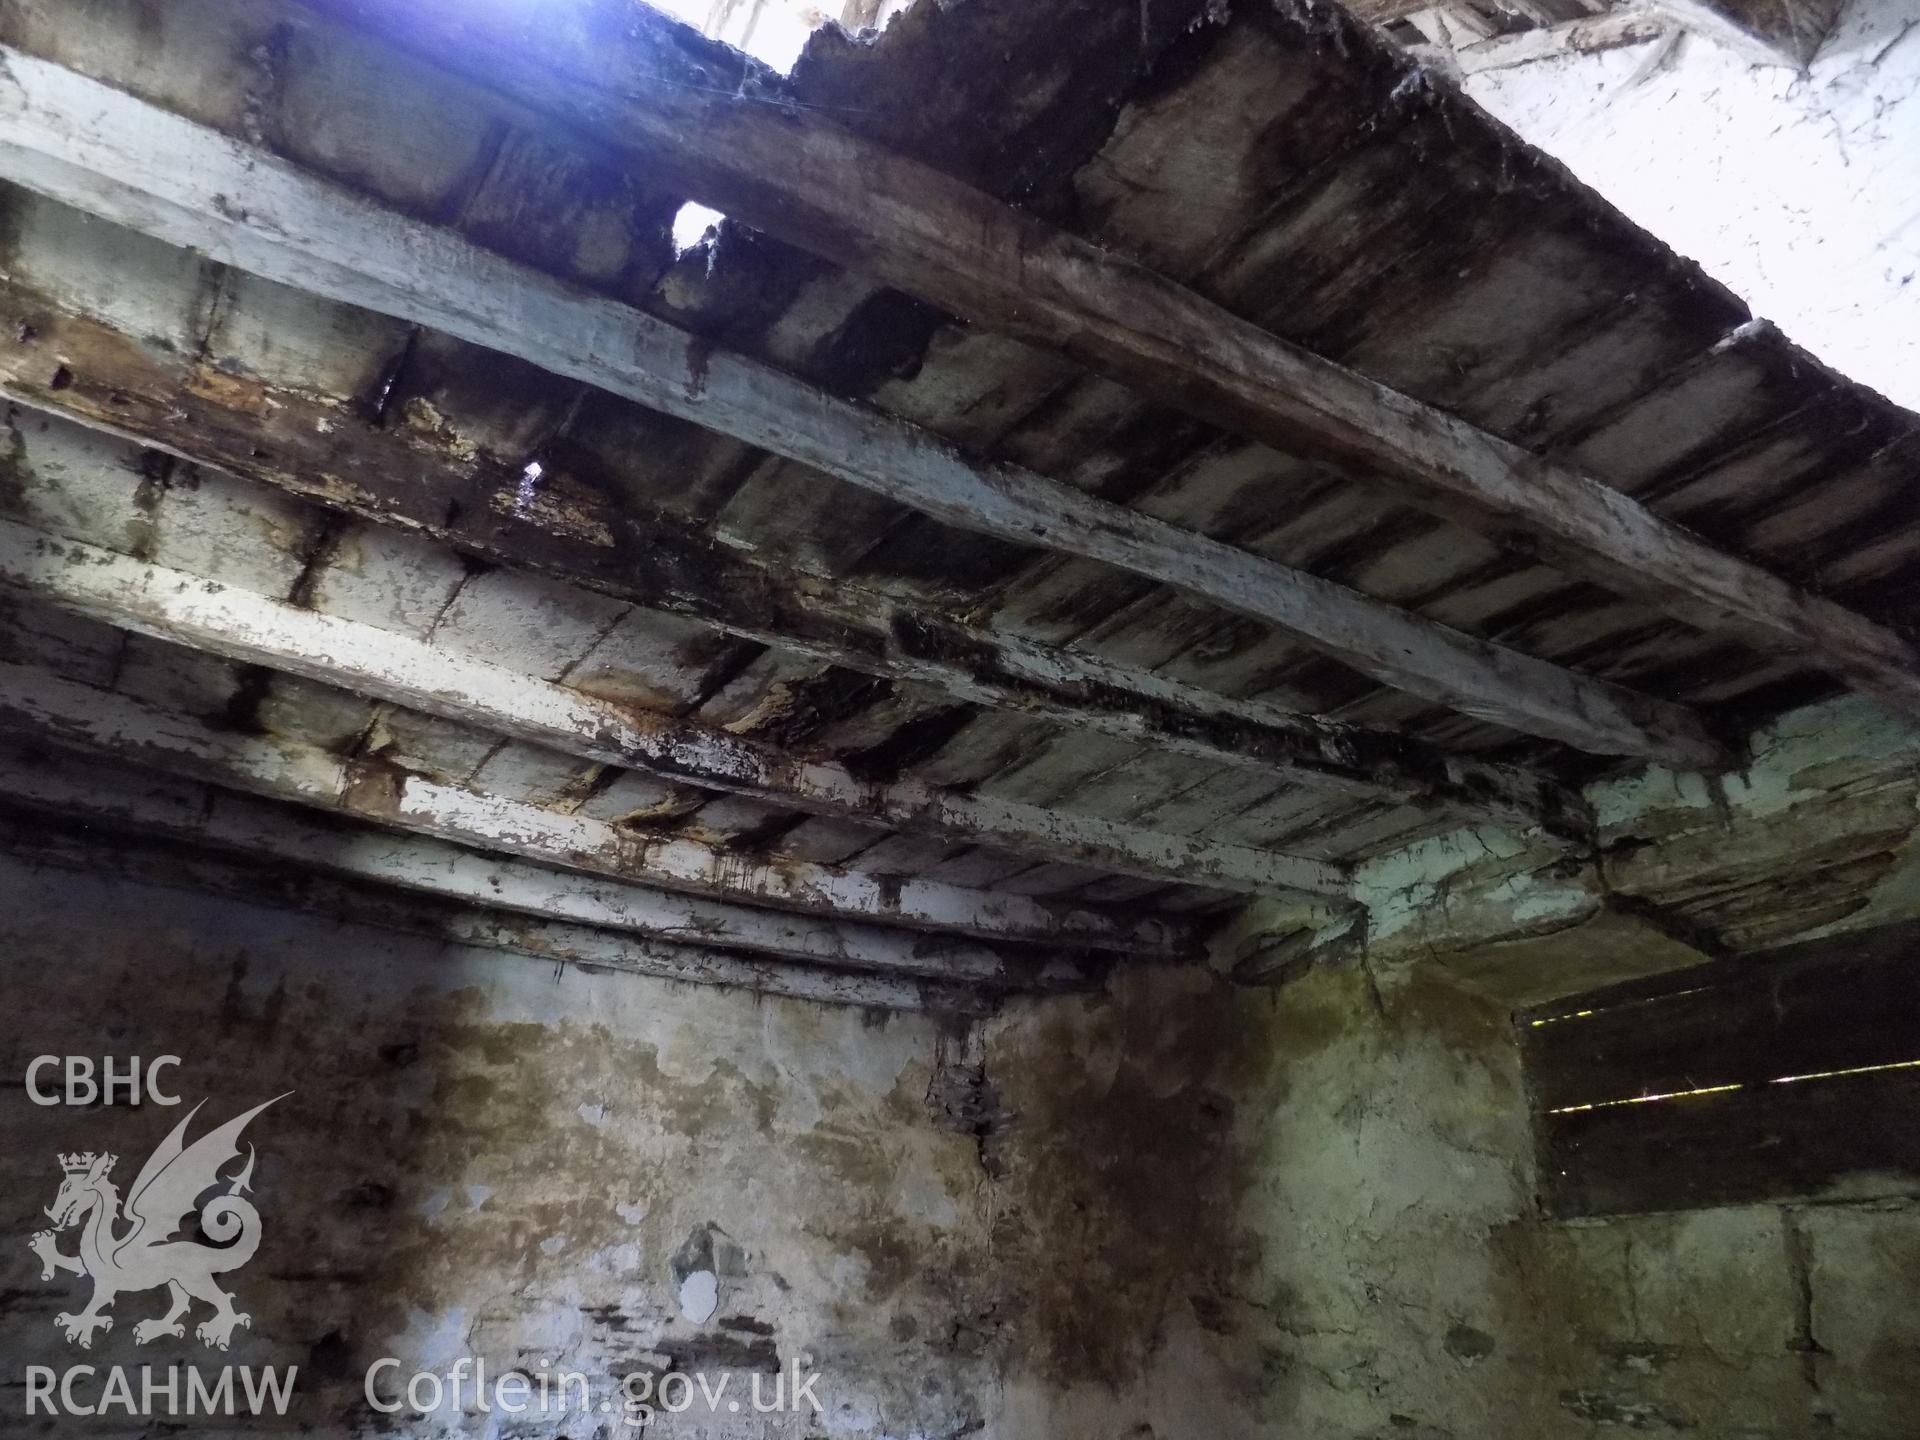 Digital colour photograph showing interior view of remains of ceiling in building attached to Tywyll Nodwydd house, Pennal, dated 2019. Photographed by Mr Gary Coulsby to meet a condition attached to a planning application.